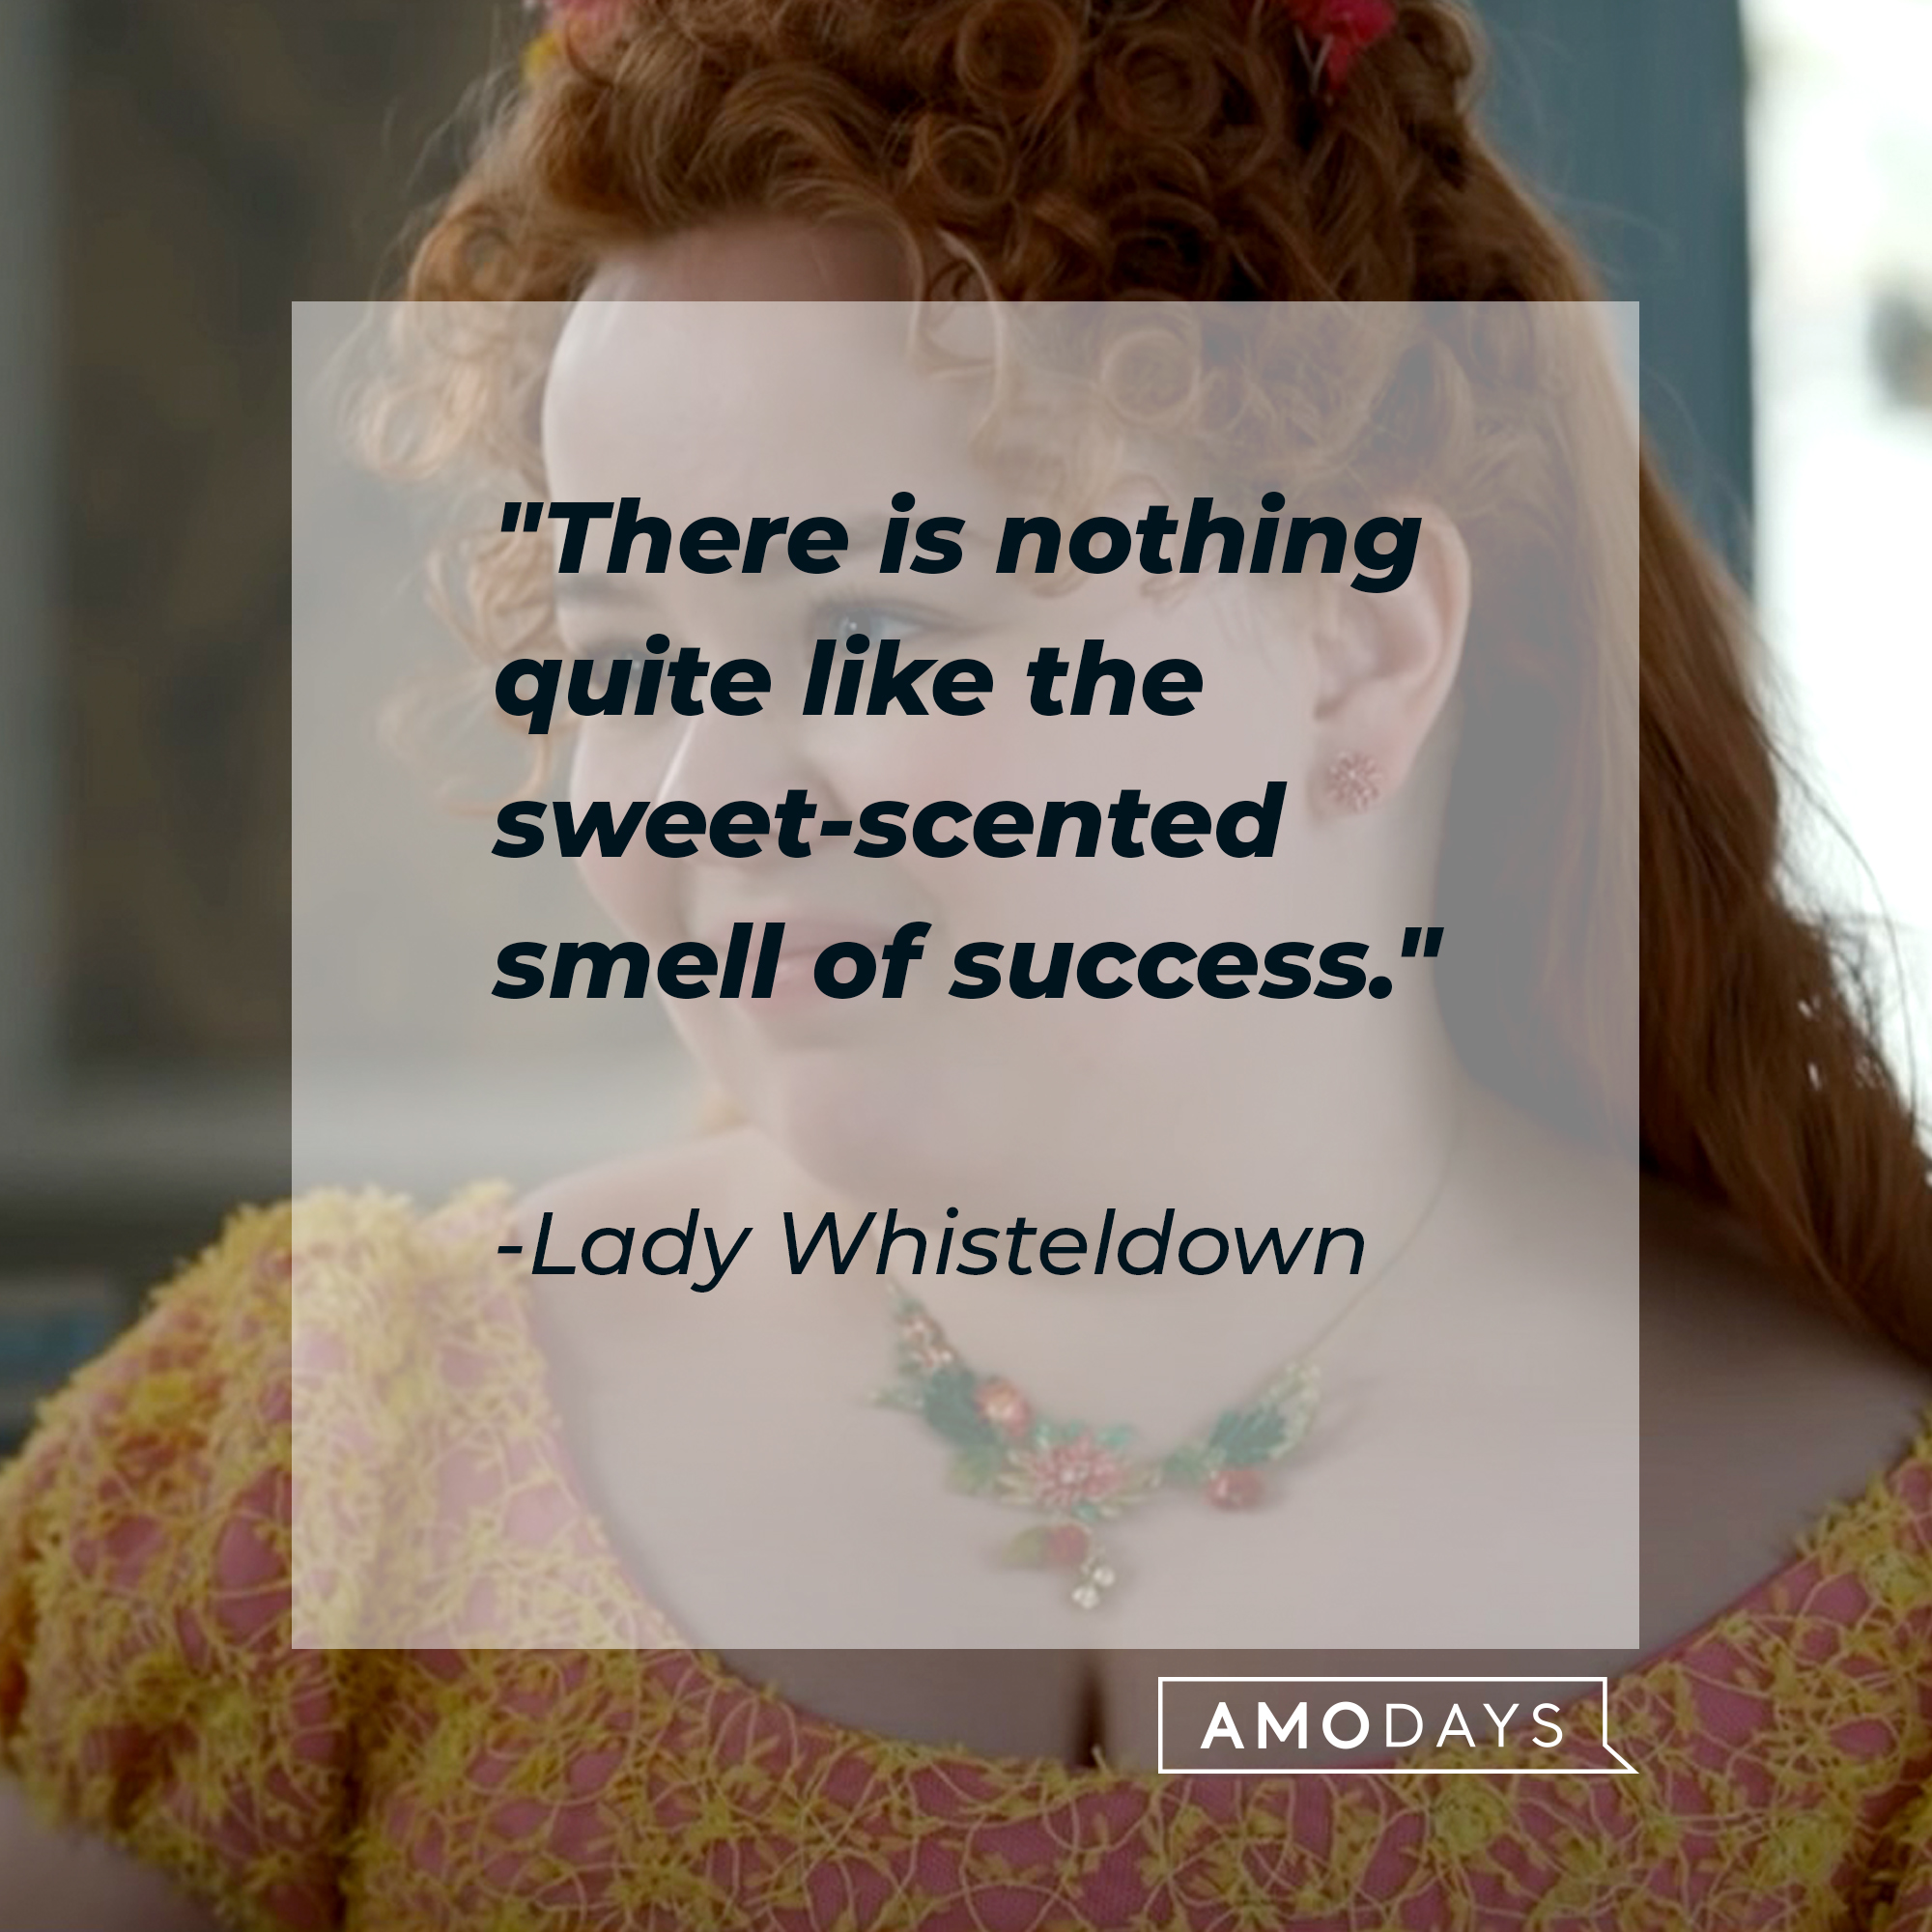 An image of Penelope Featherington with a quote from Lady Whisteldown: "There is nothing quite like the sweet-scented smell of success." │Source: youtube.com/Netflix